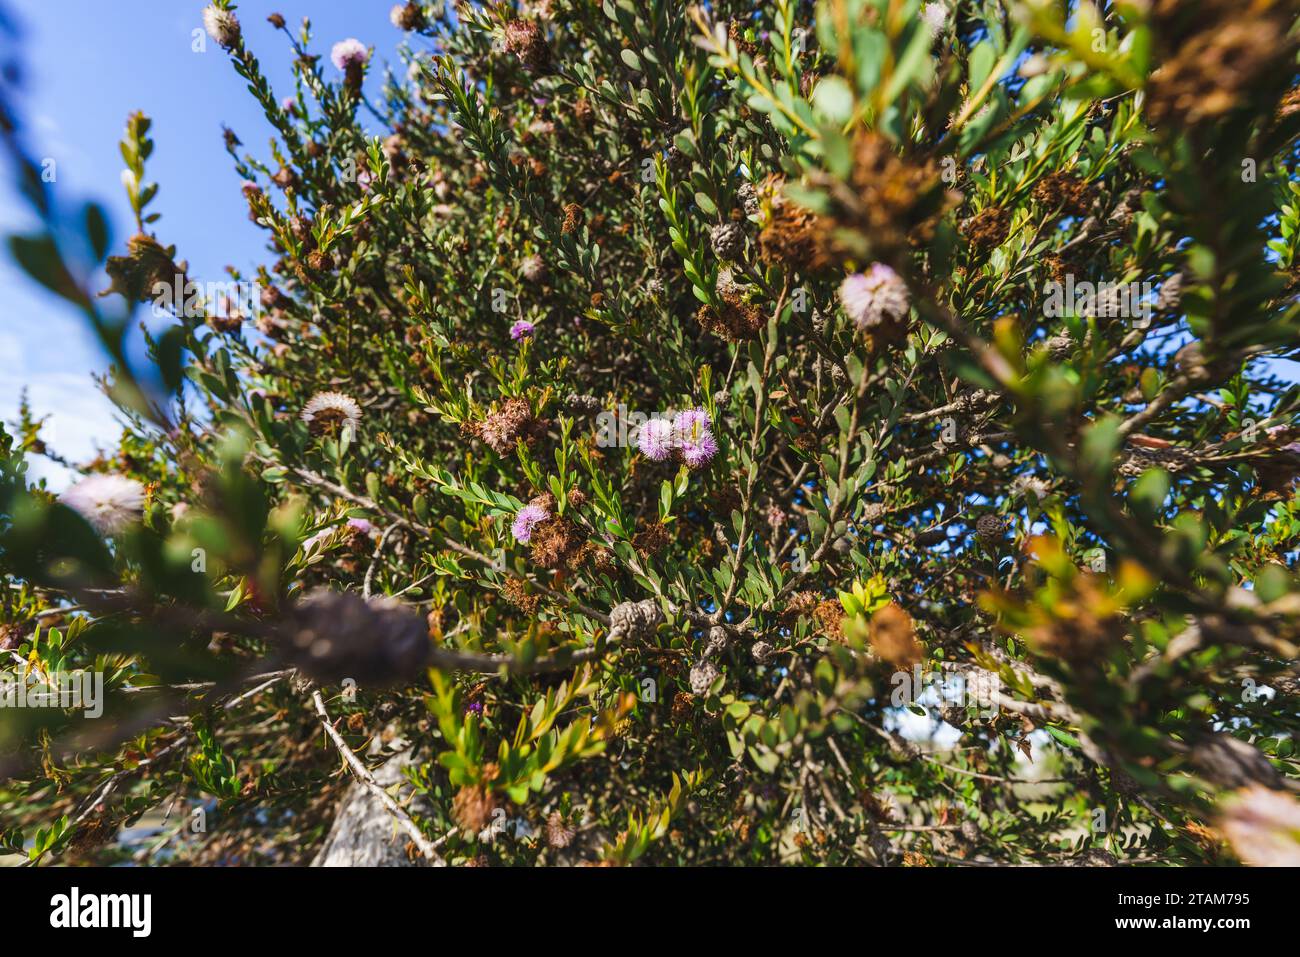 Snowy Honey-myrtle (Melaleuca nesophila), also known as pink melaleuca, is a plant in the myrtle family. Close-up view with blue sky in the background Stock Photo